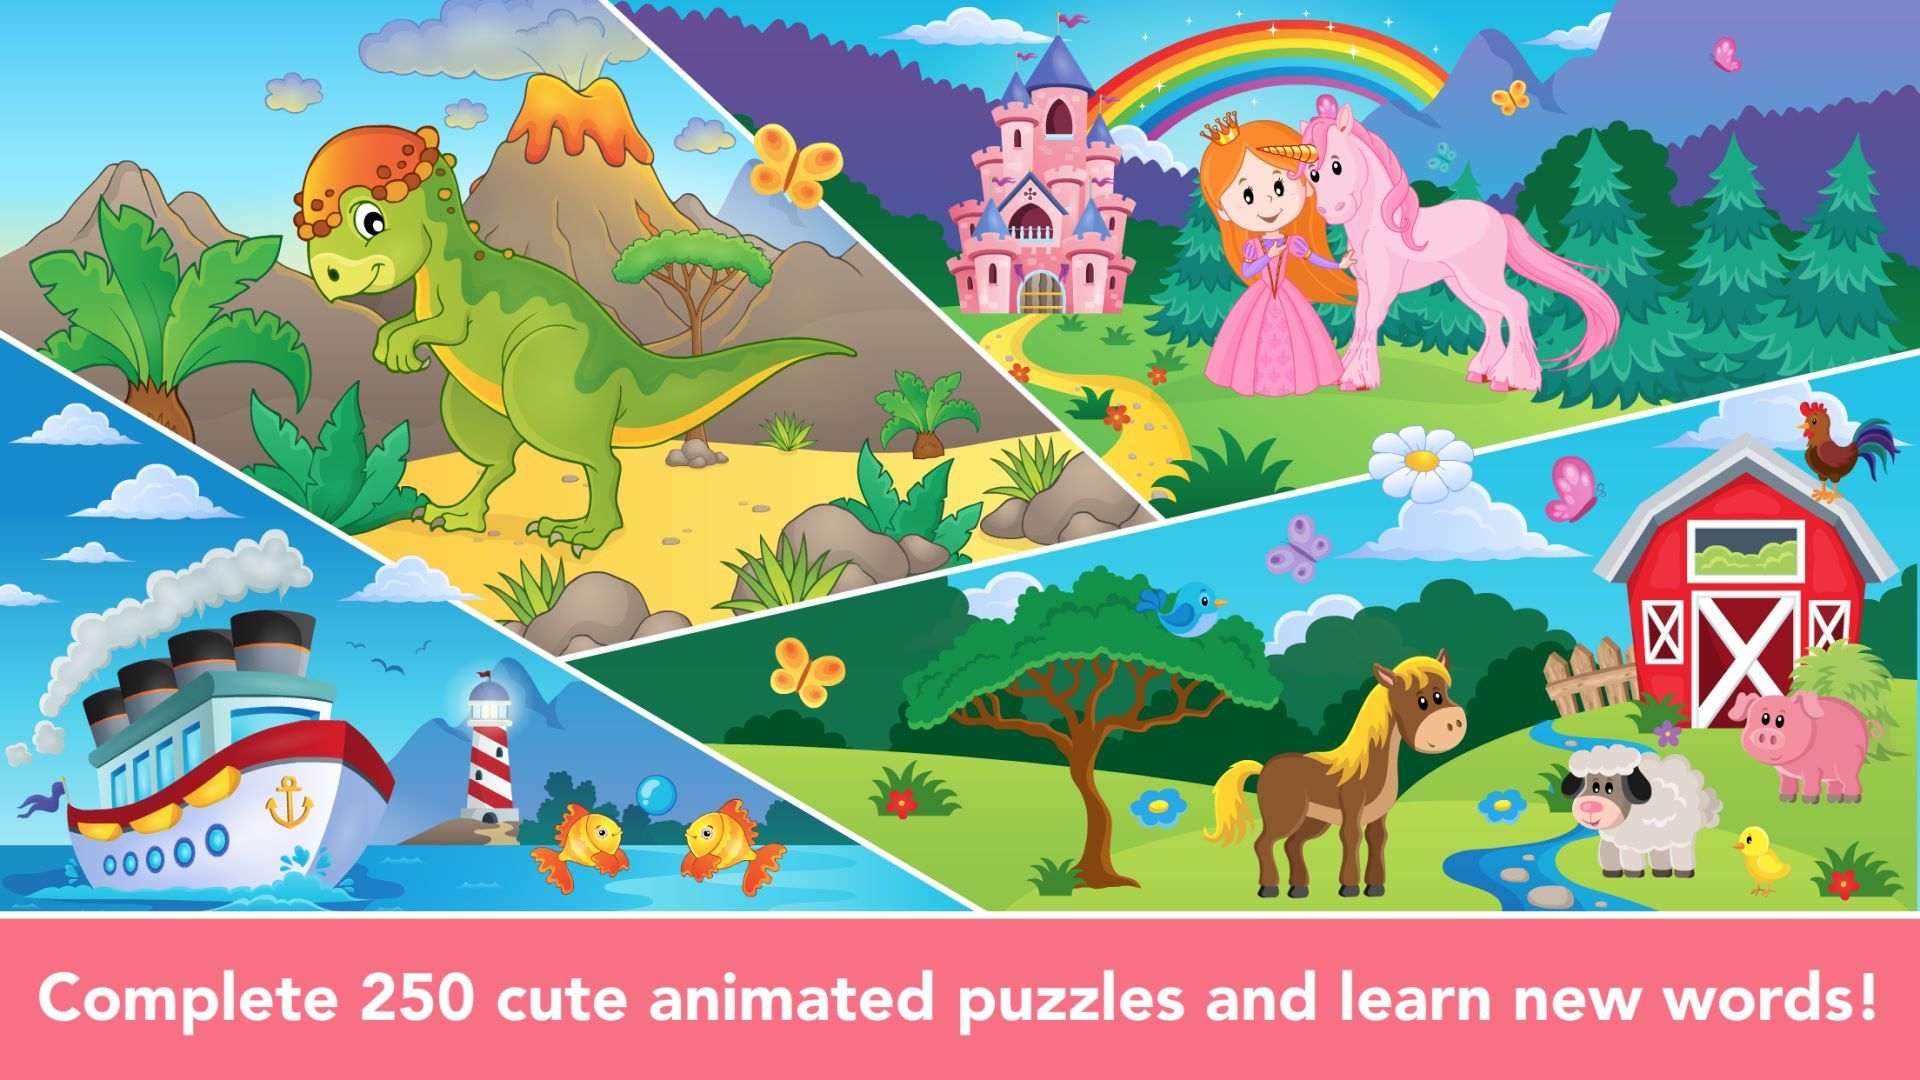 Shape Puzzle Builder for Toddlers - Free games for kids 1, 2, 3, 4, 5 years old